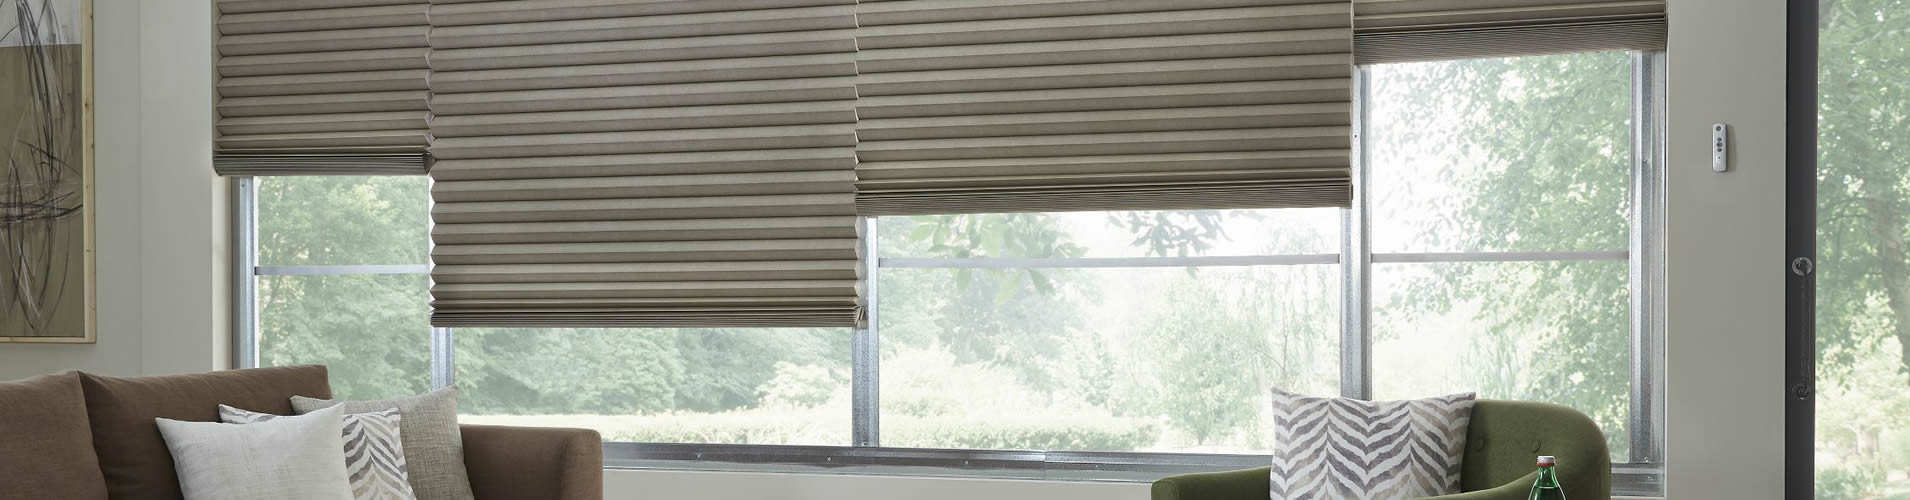 Hunter Douglas Window Blinds Power Rise Remote Control Shades